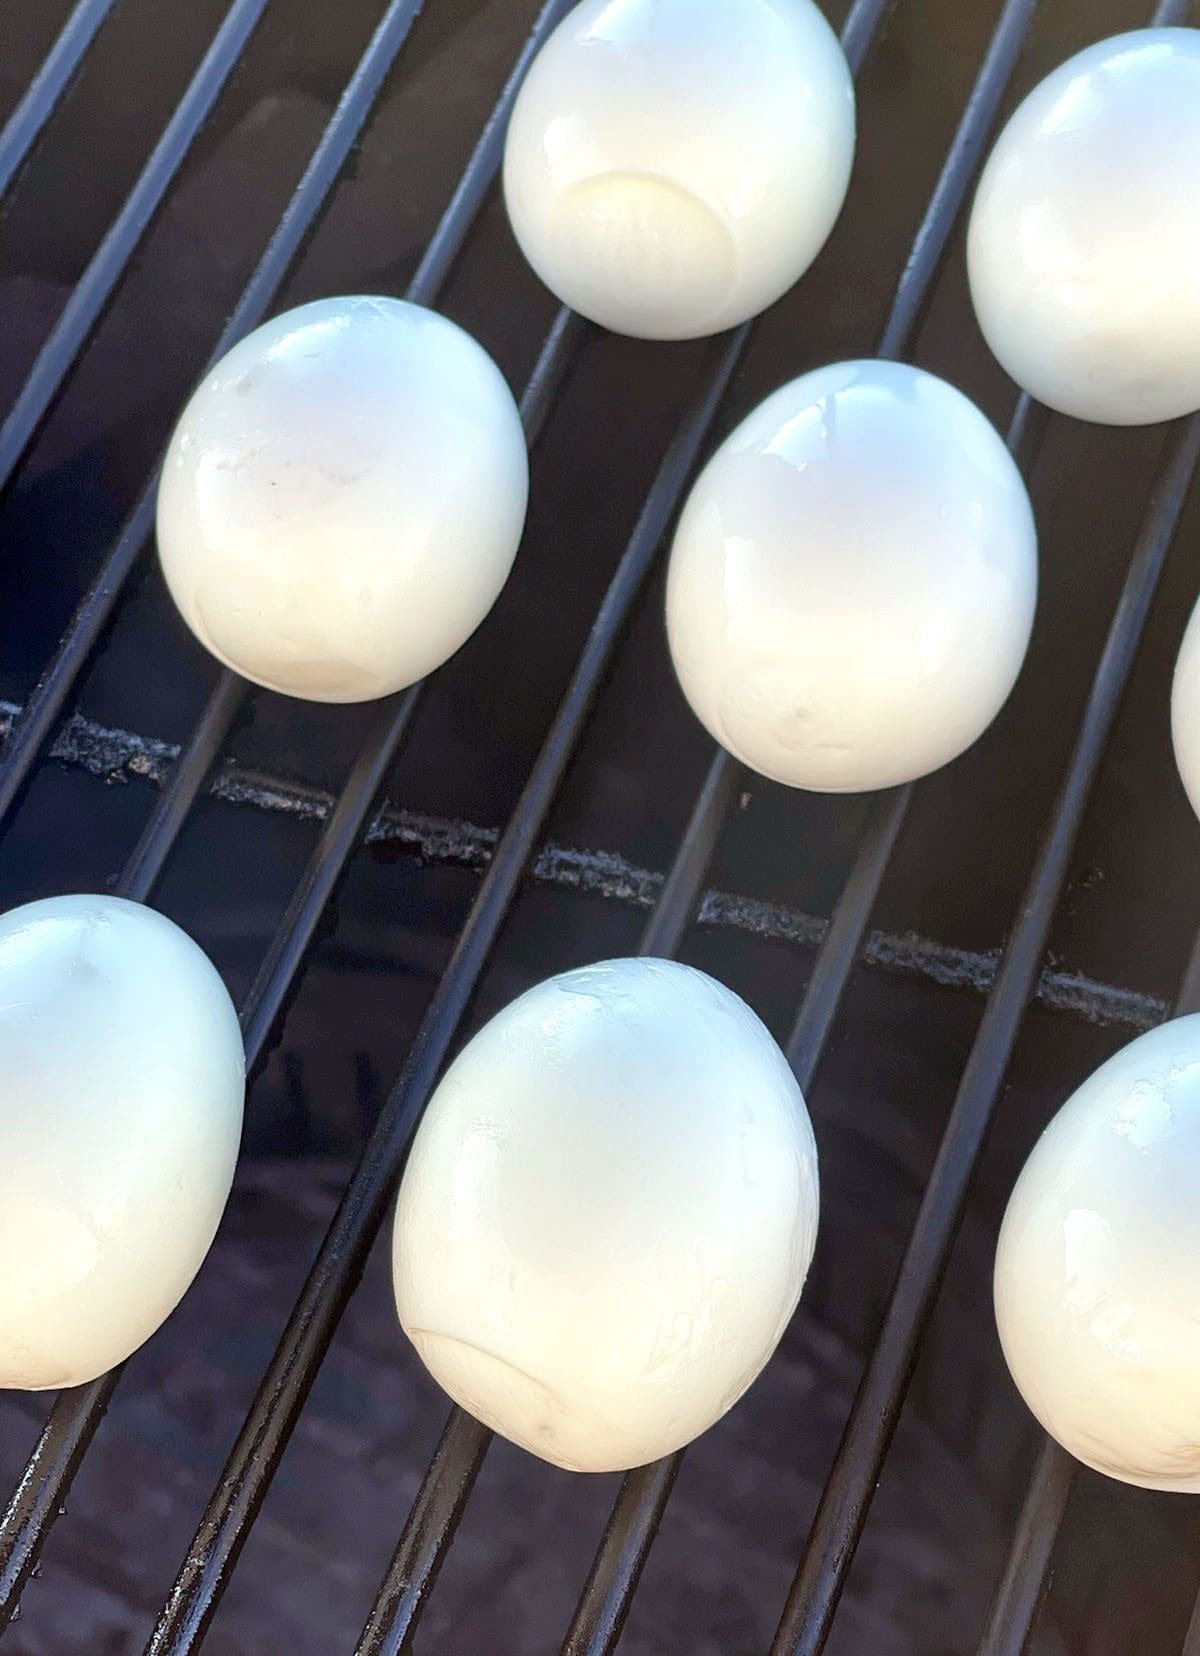 Hard boiled eggs on a grill.